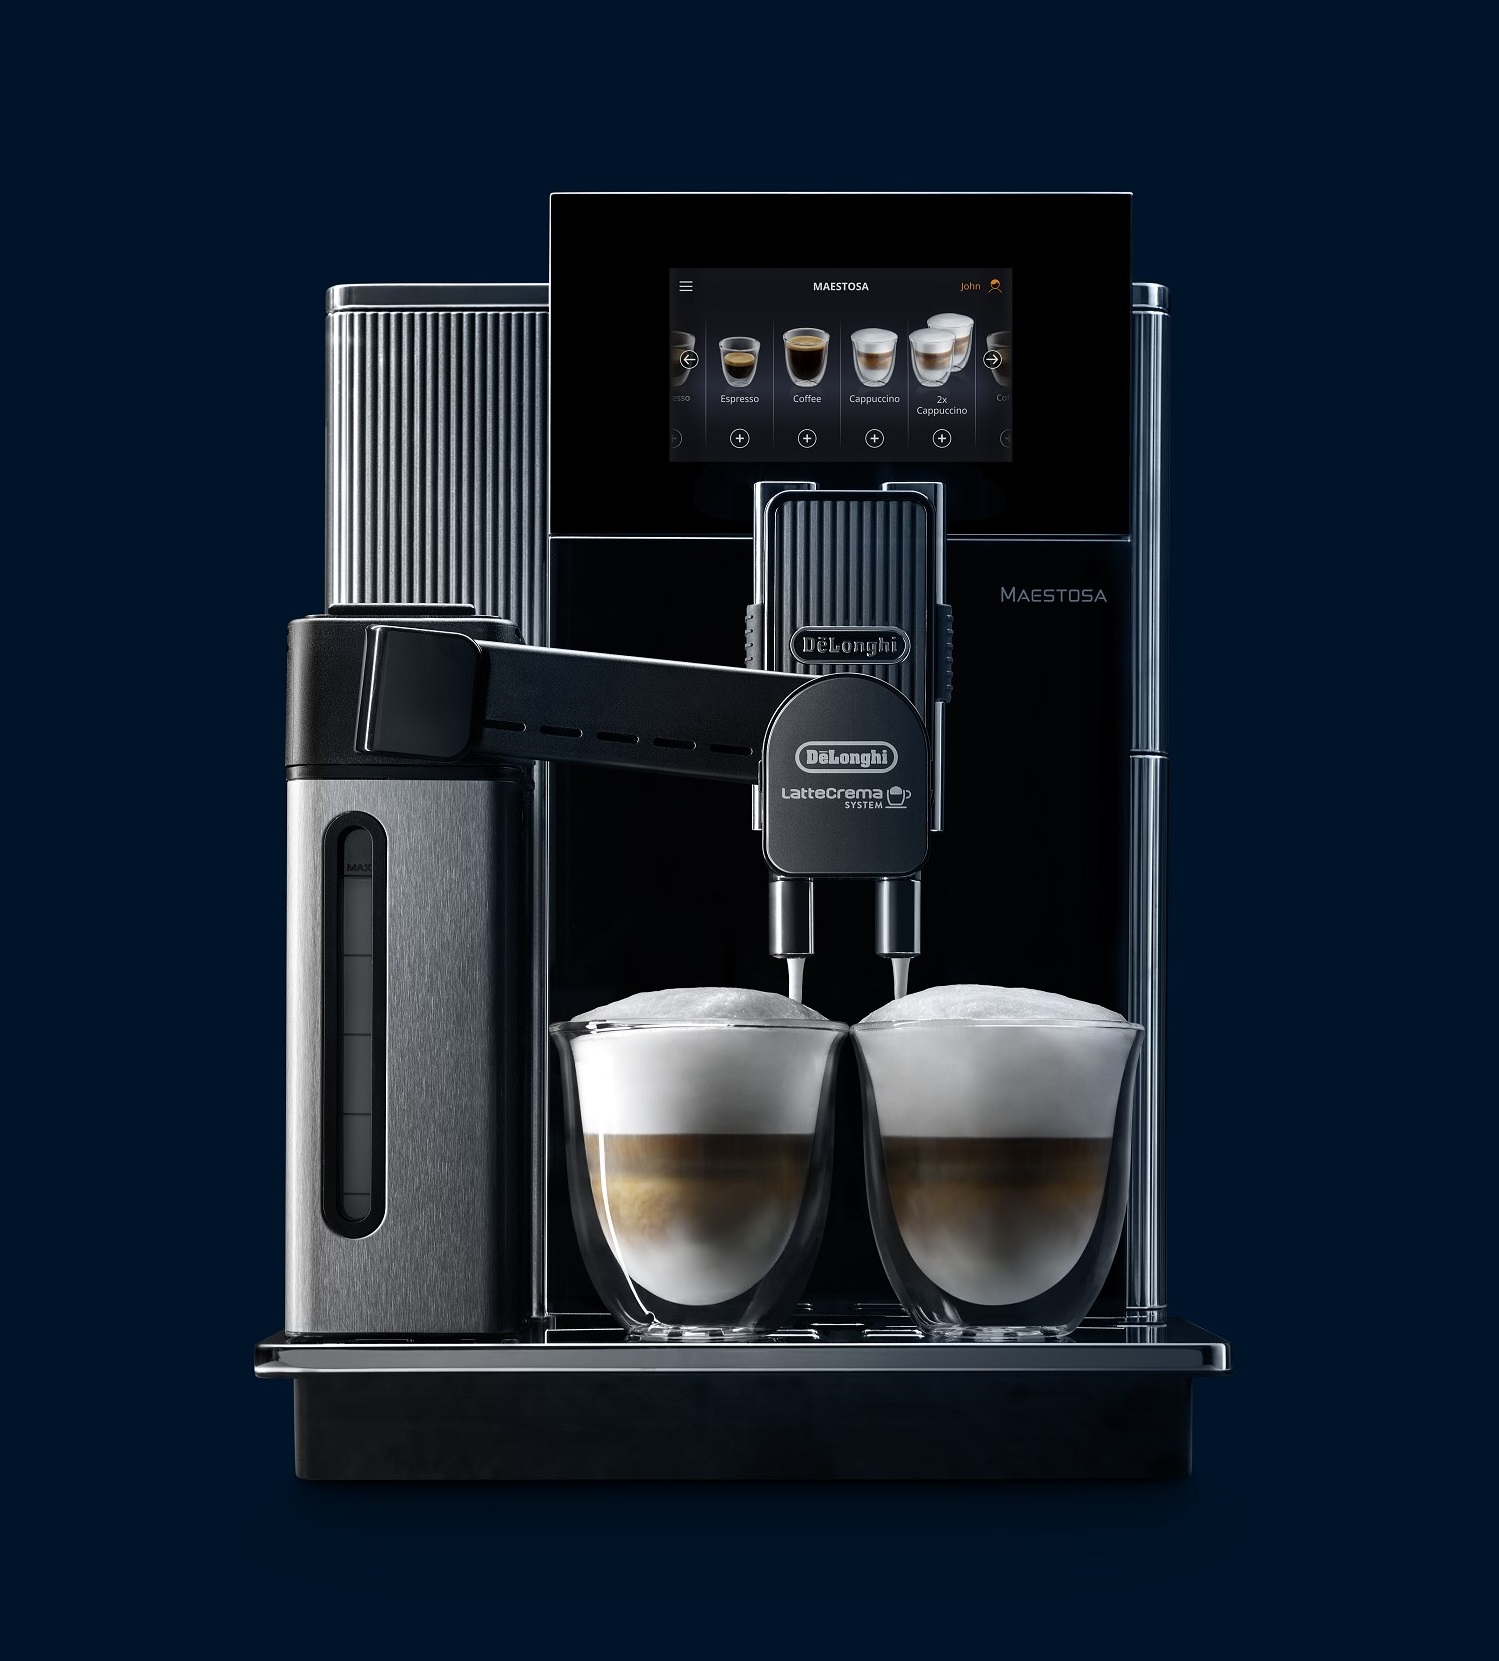 Maestosa By DeLonghi Luxurious Automated Coffee Machine 1, Design Authority